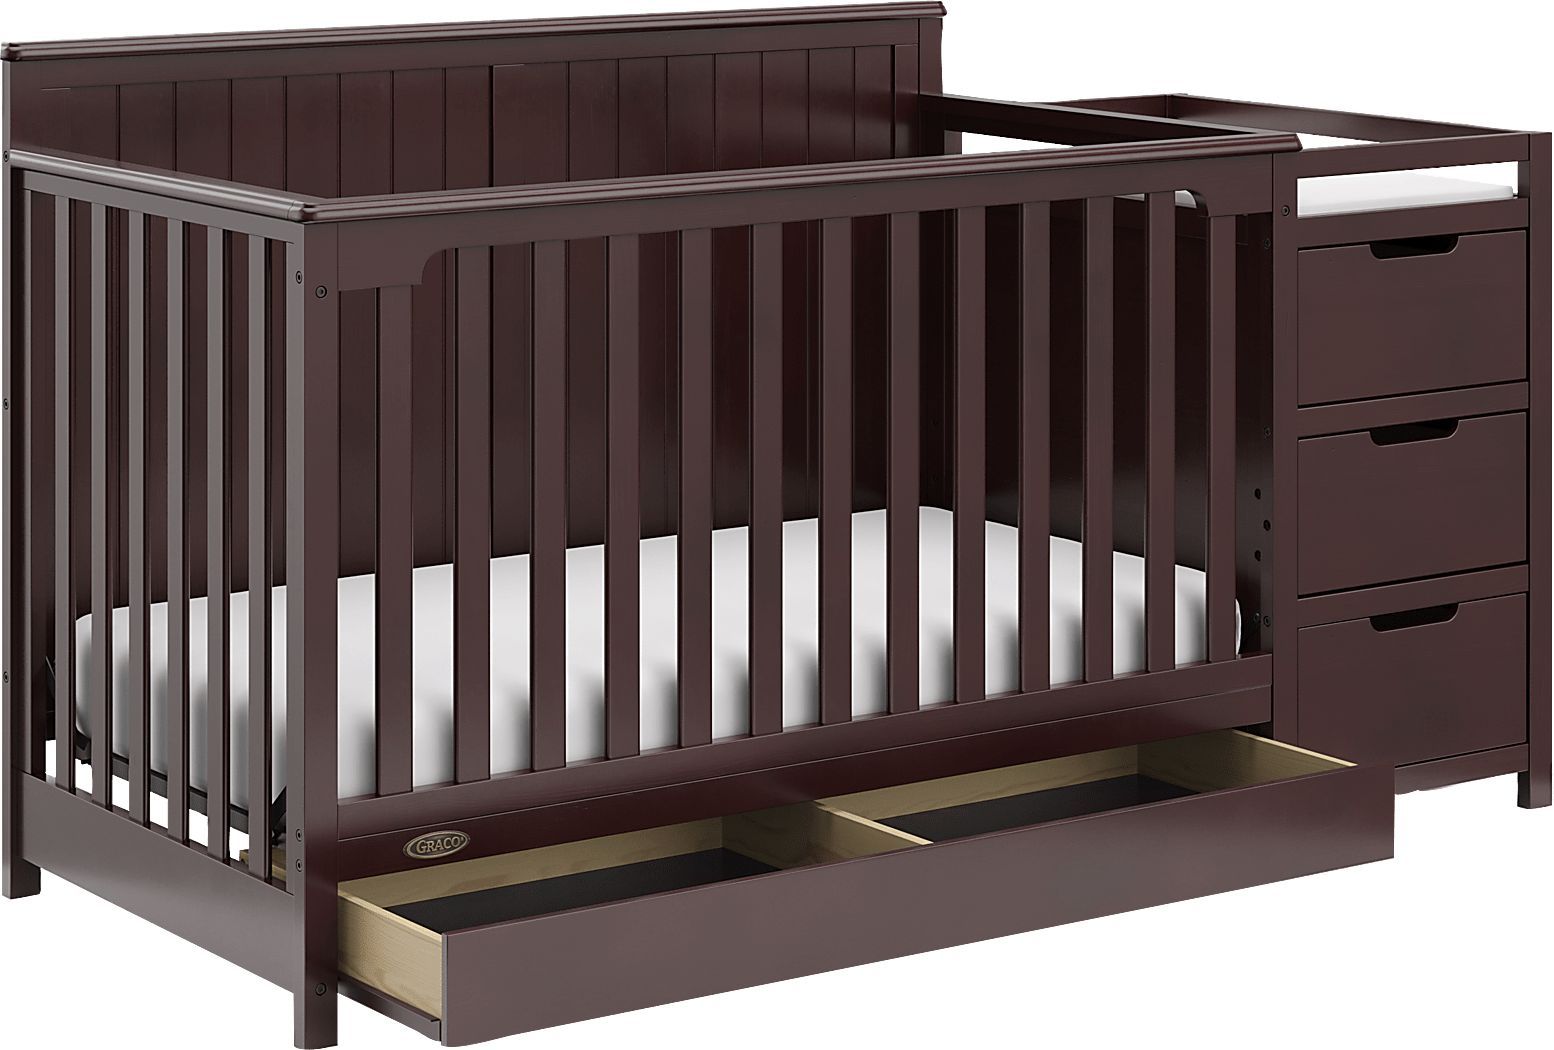 The Ultimate Nursery Solution: Convertible Crib with Attached Changing Table